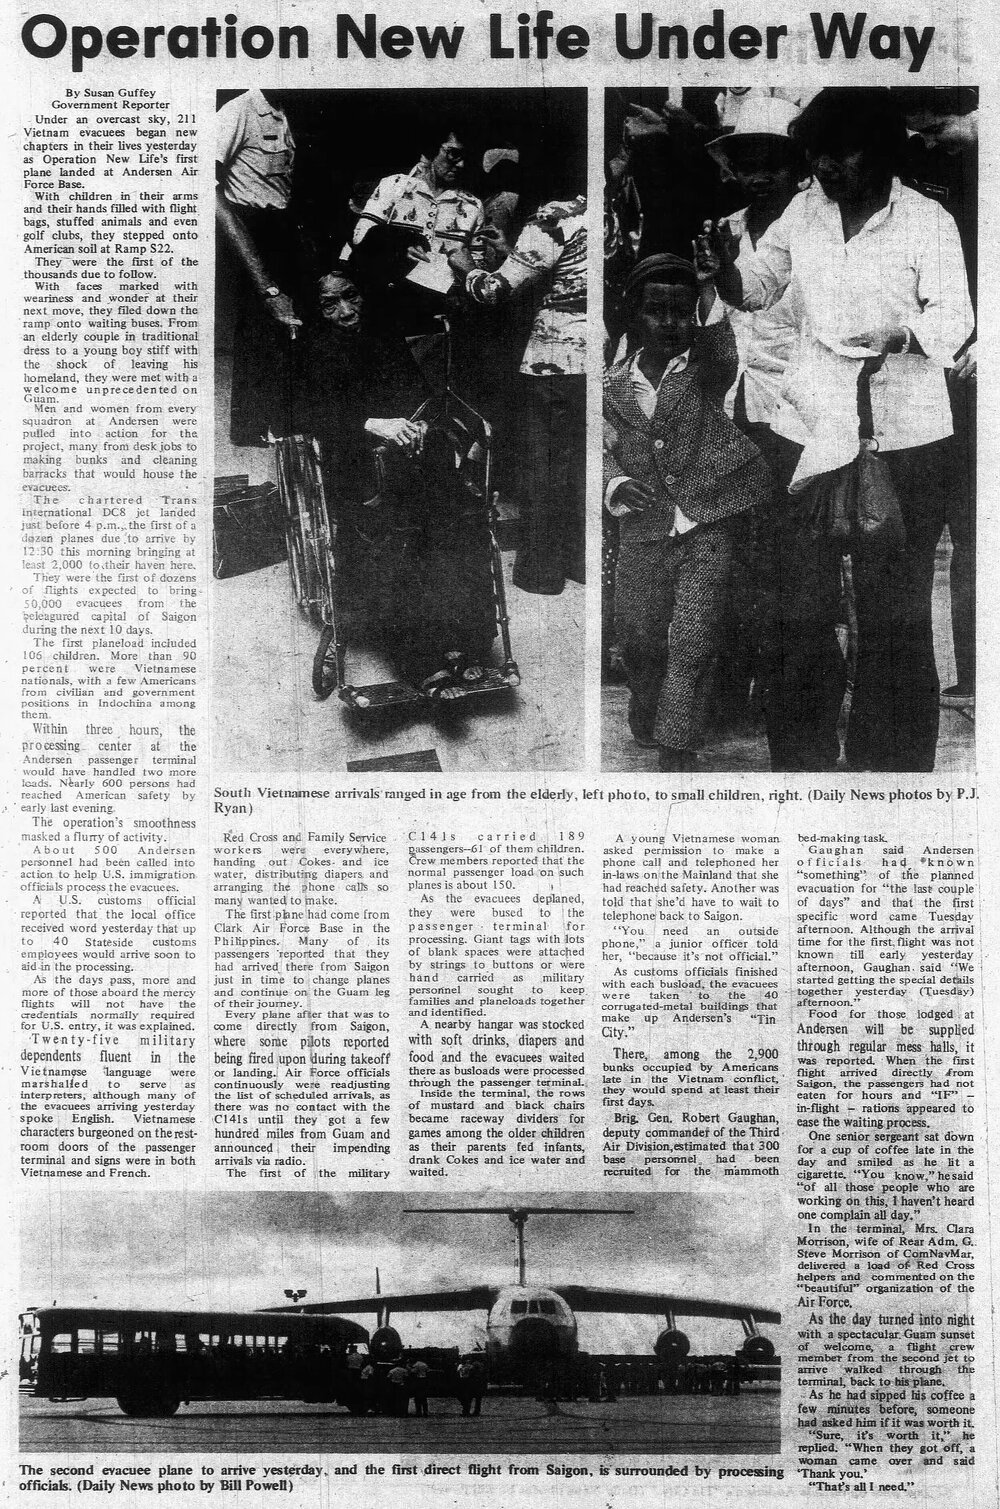 Pacific Daily News_Apr 24, 1975_Pg.2